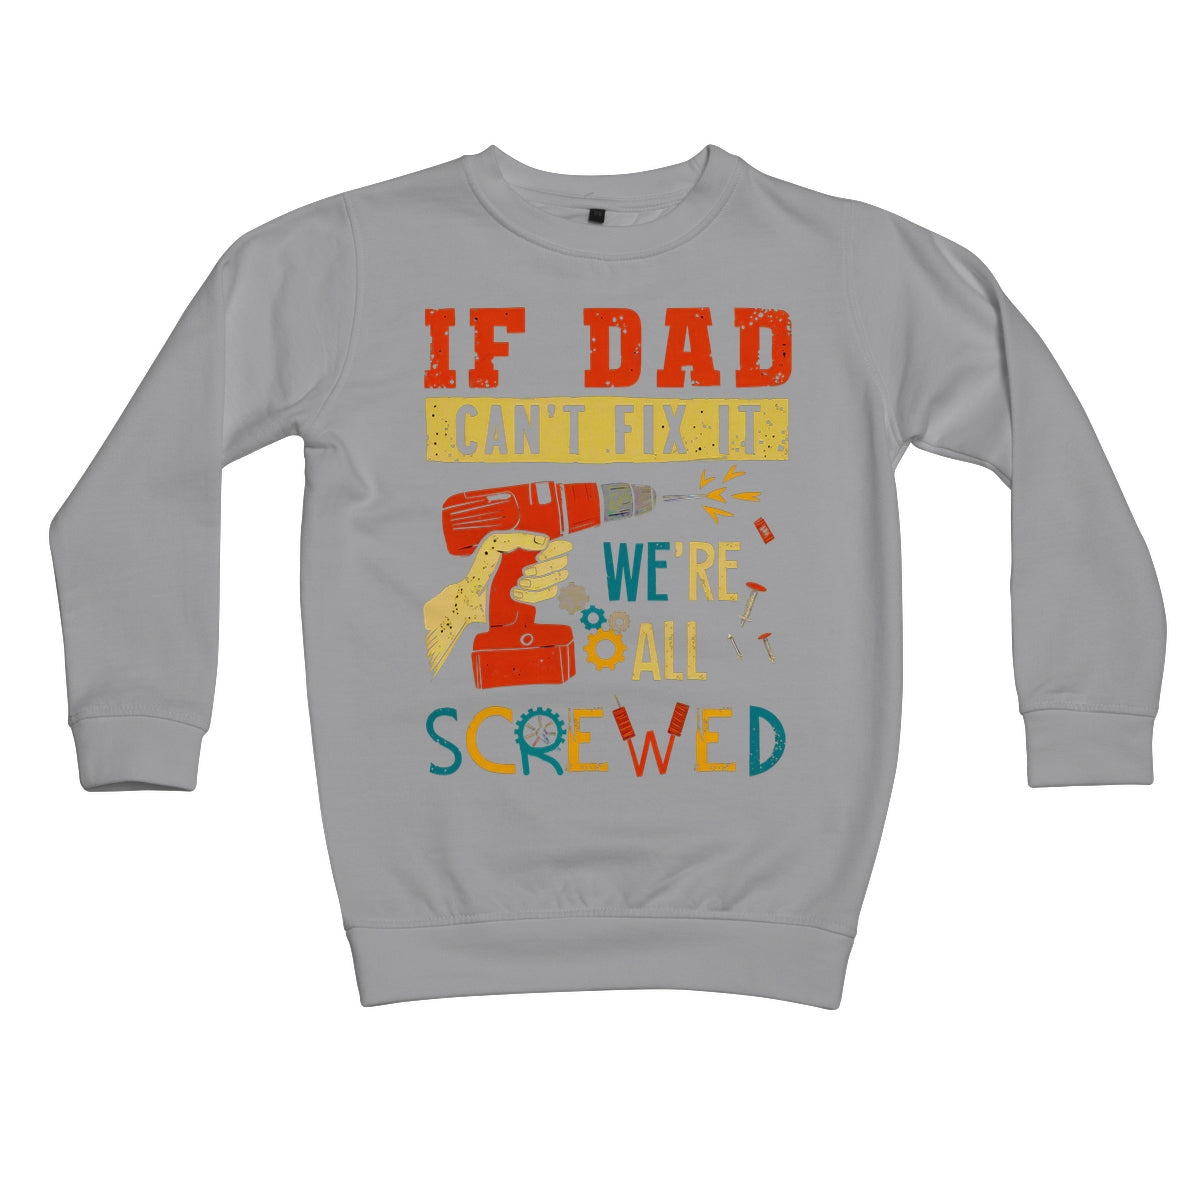 If Dad Csm't Fit It We Are All Screwed Kids Sweatshirt